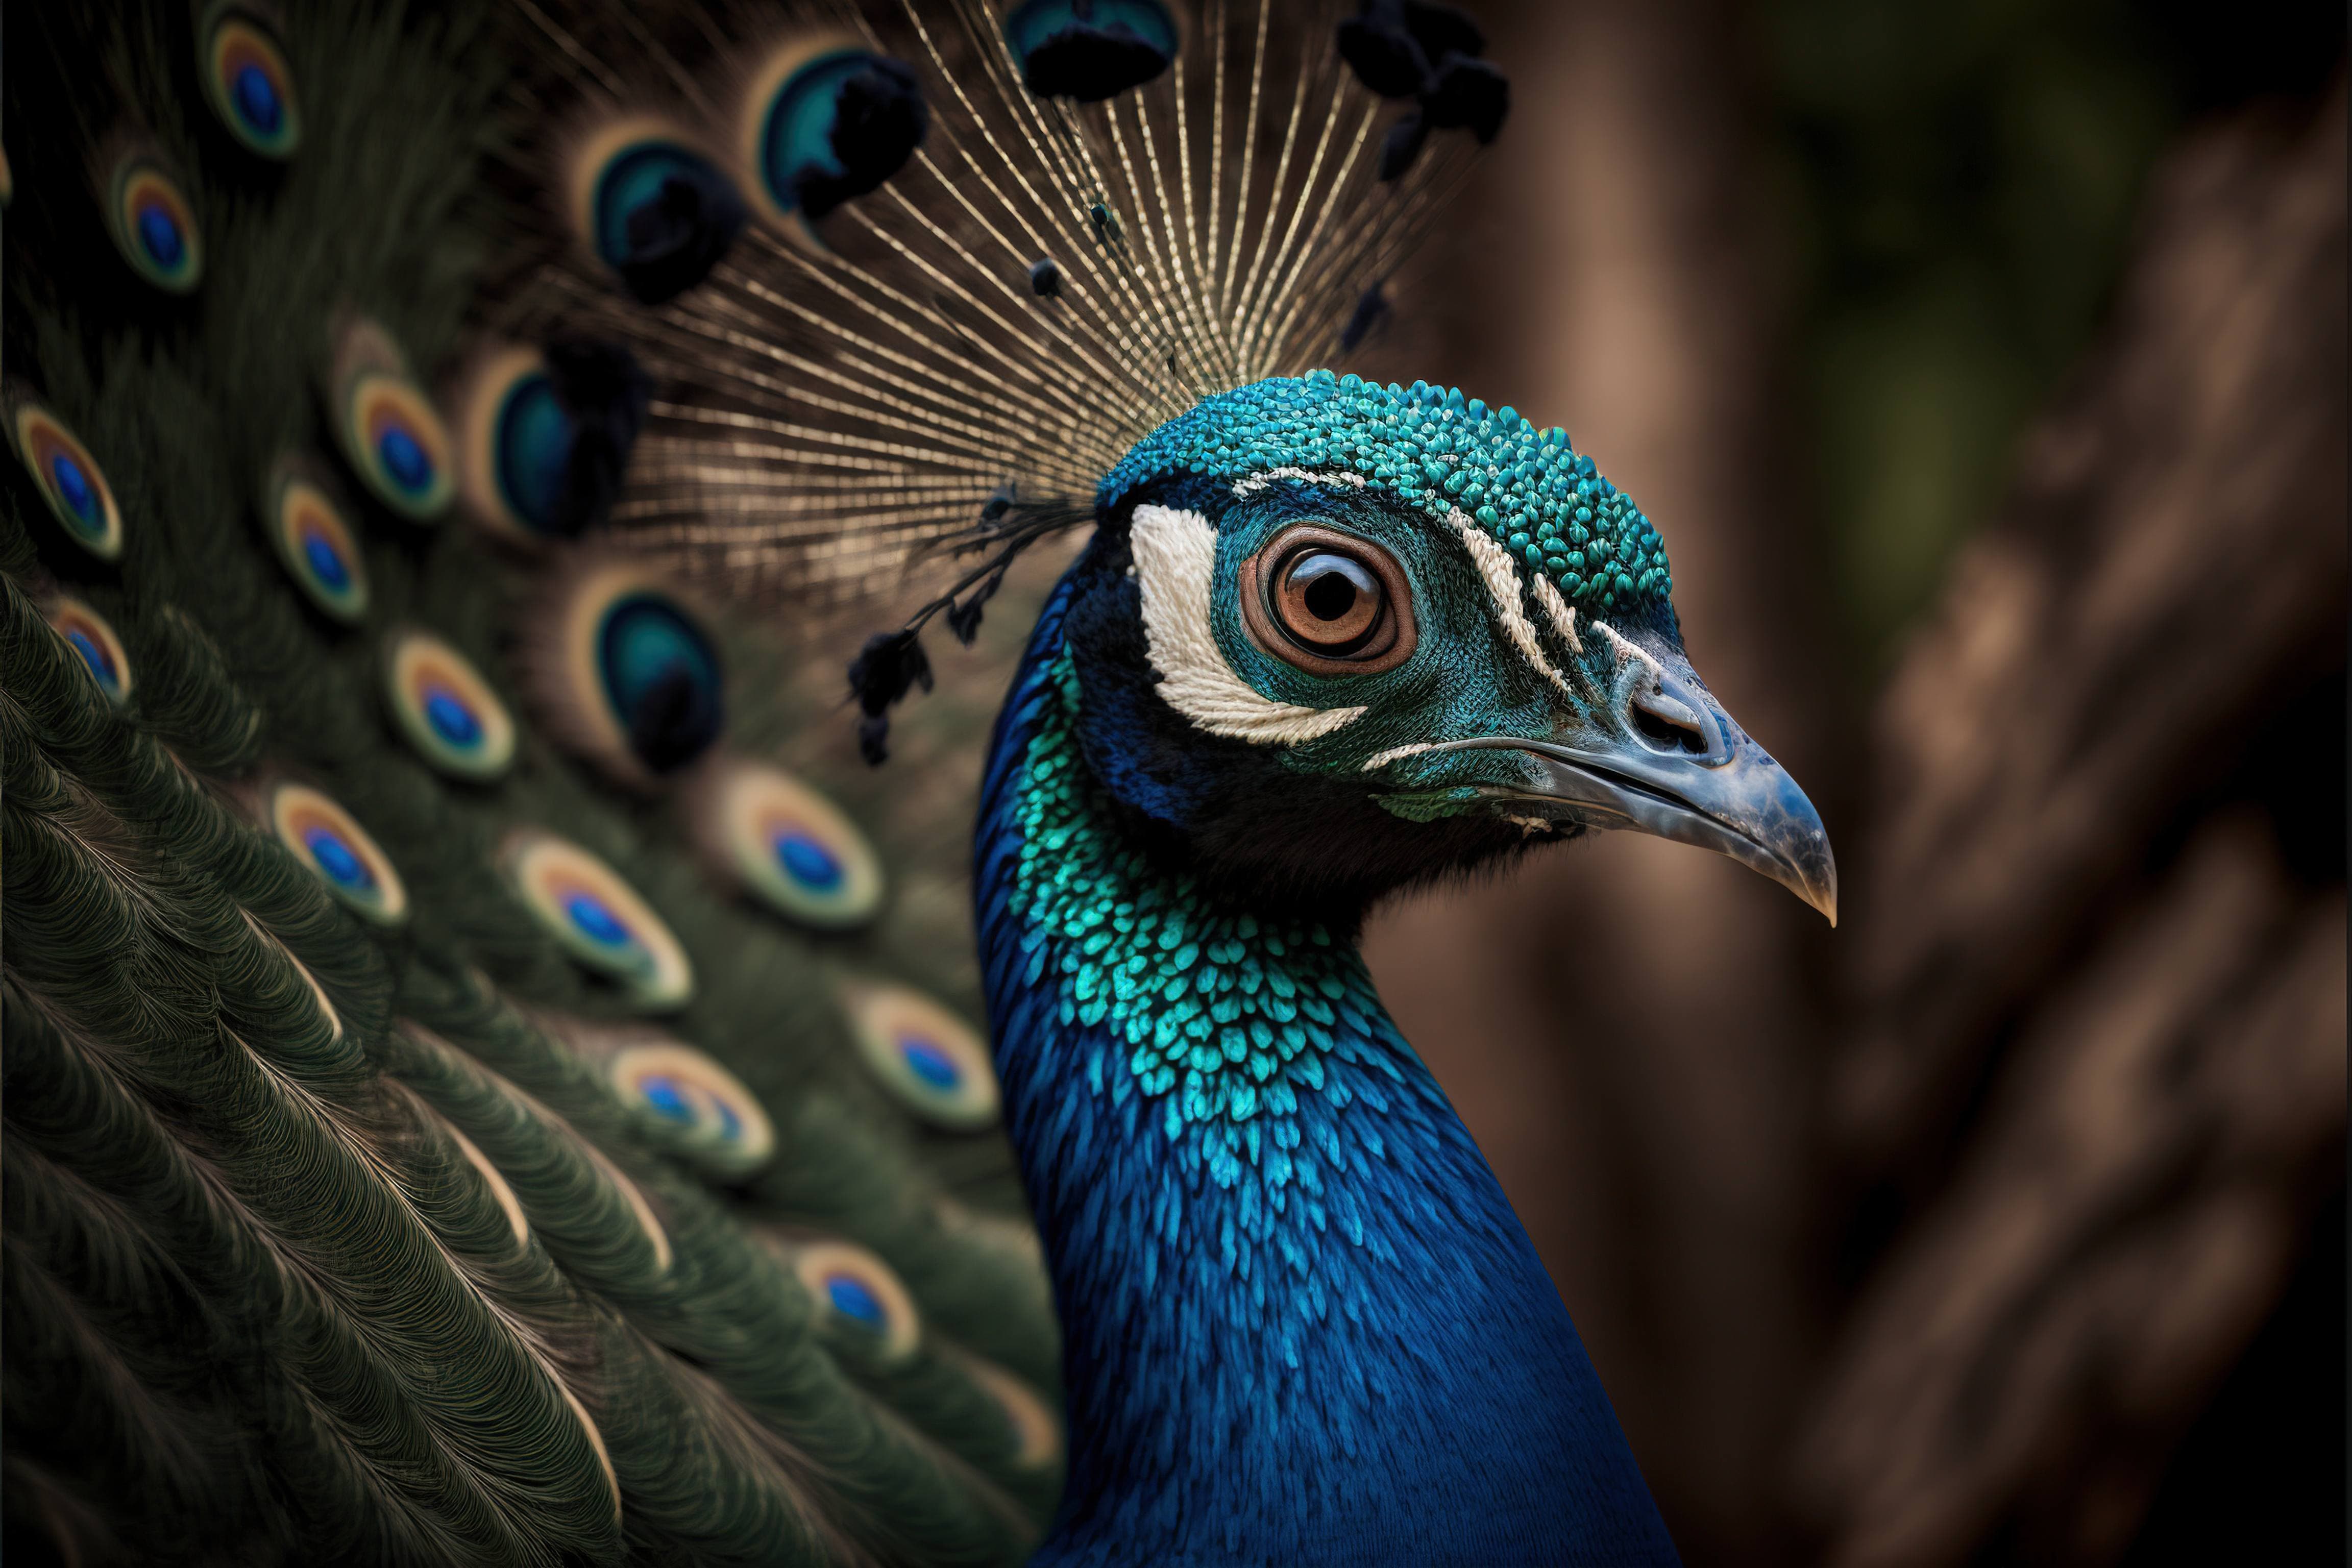 The most stunning peacock you've ever seen